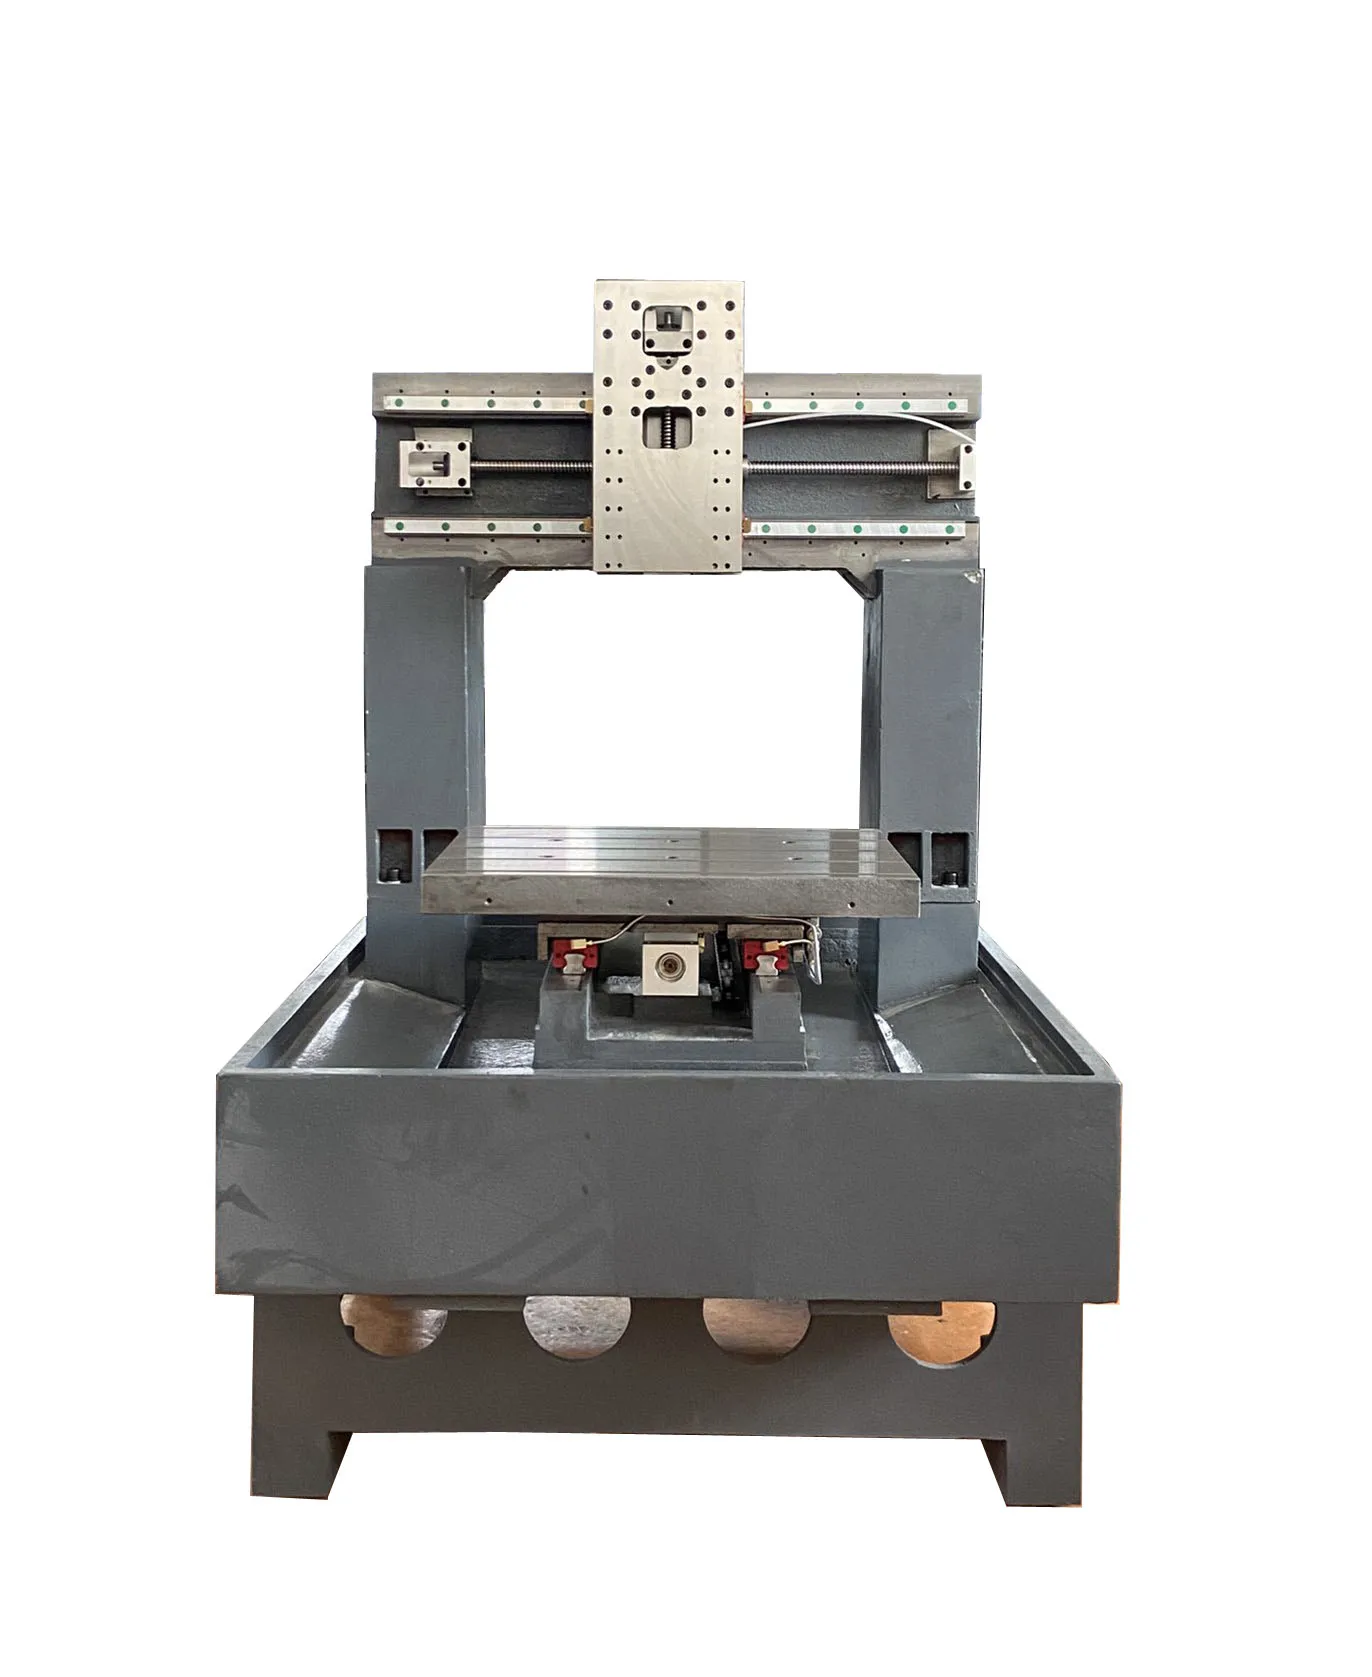 3 axis CNC carving machine with 4 axis 5 axis cnc lathe machine turning